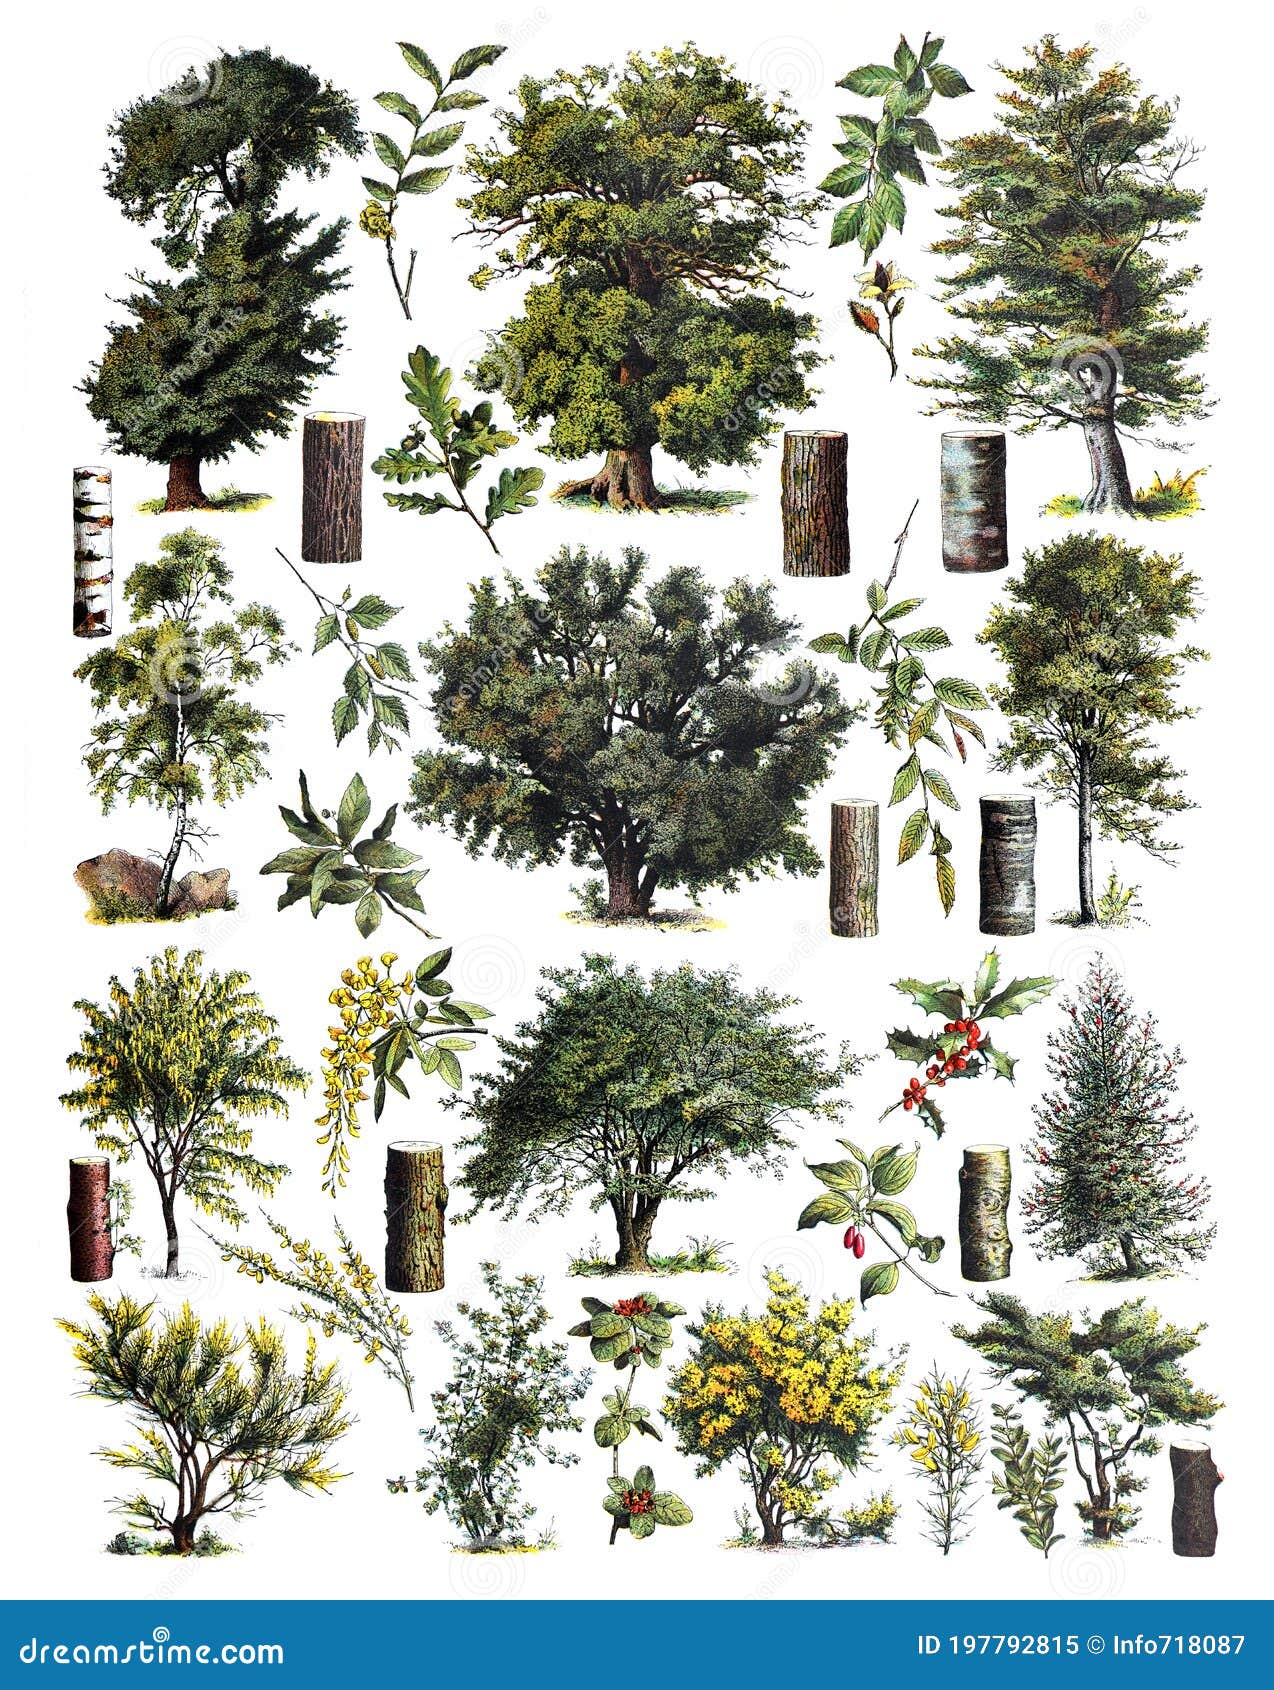 The Vintage Collection of Trees / Diversity of Trees Antique Engraved ...